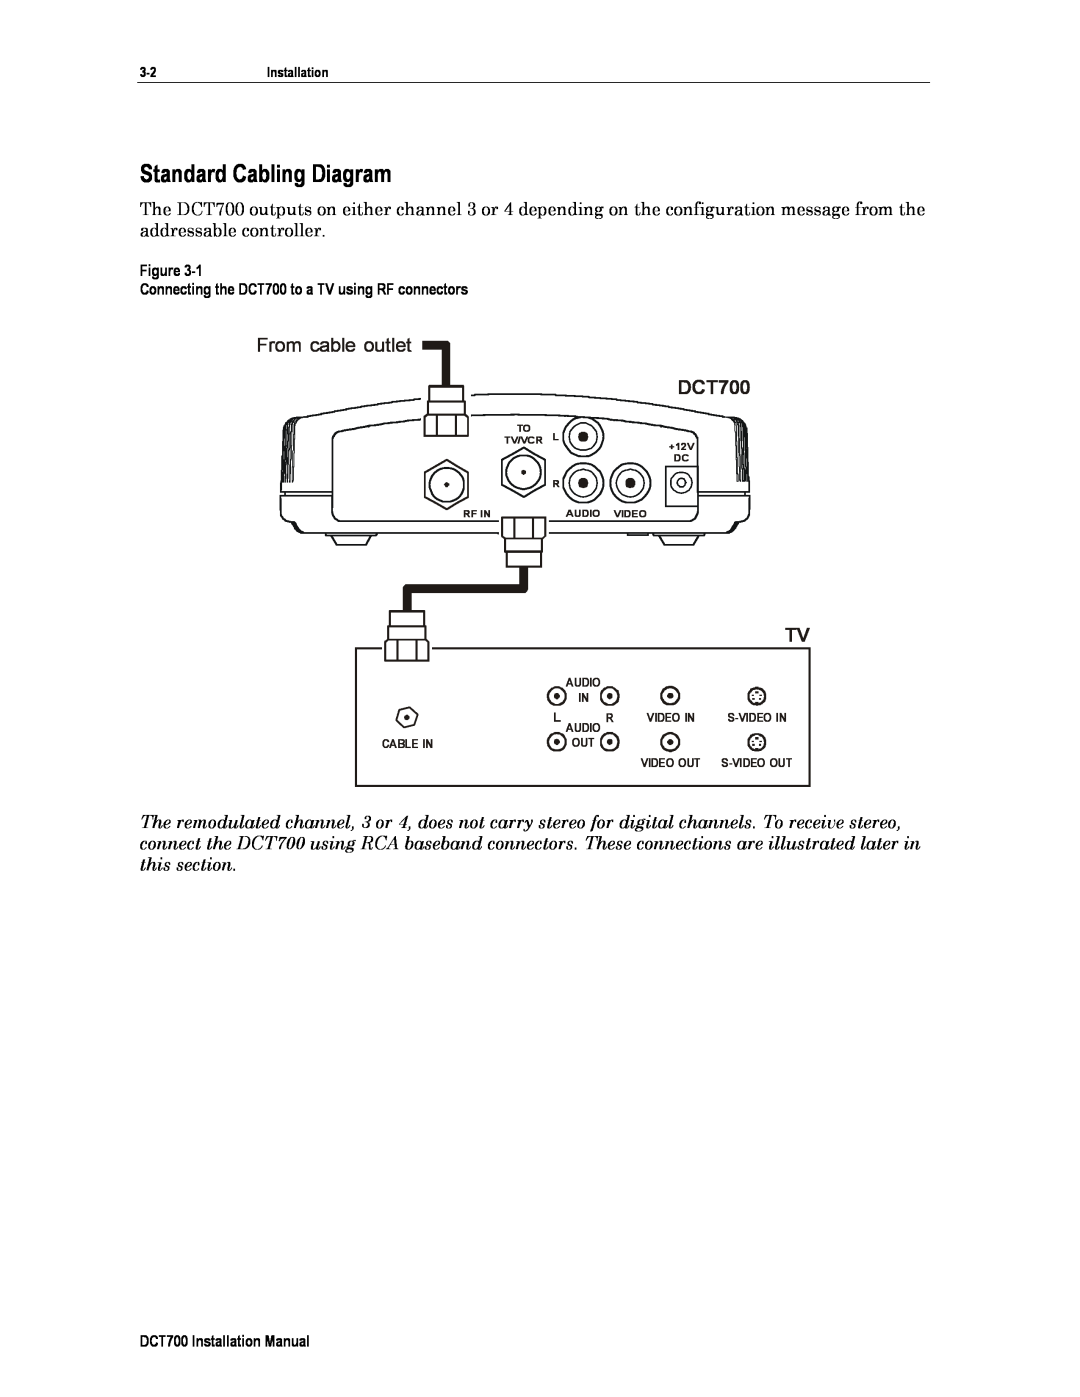 Motorola DTC700 installation manual Standard Cabling Diagram, DCT700, From cable outlet 